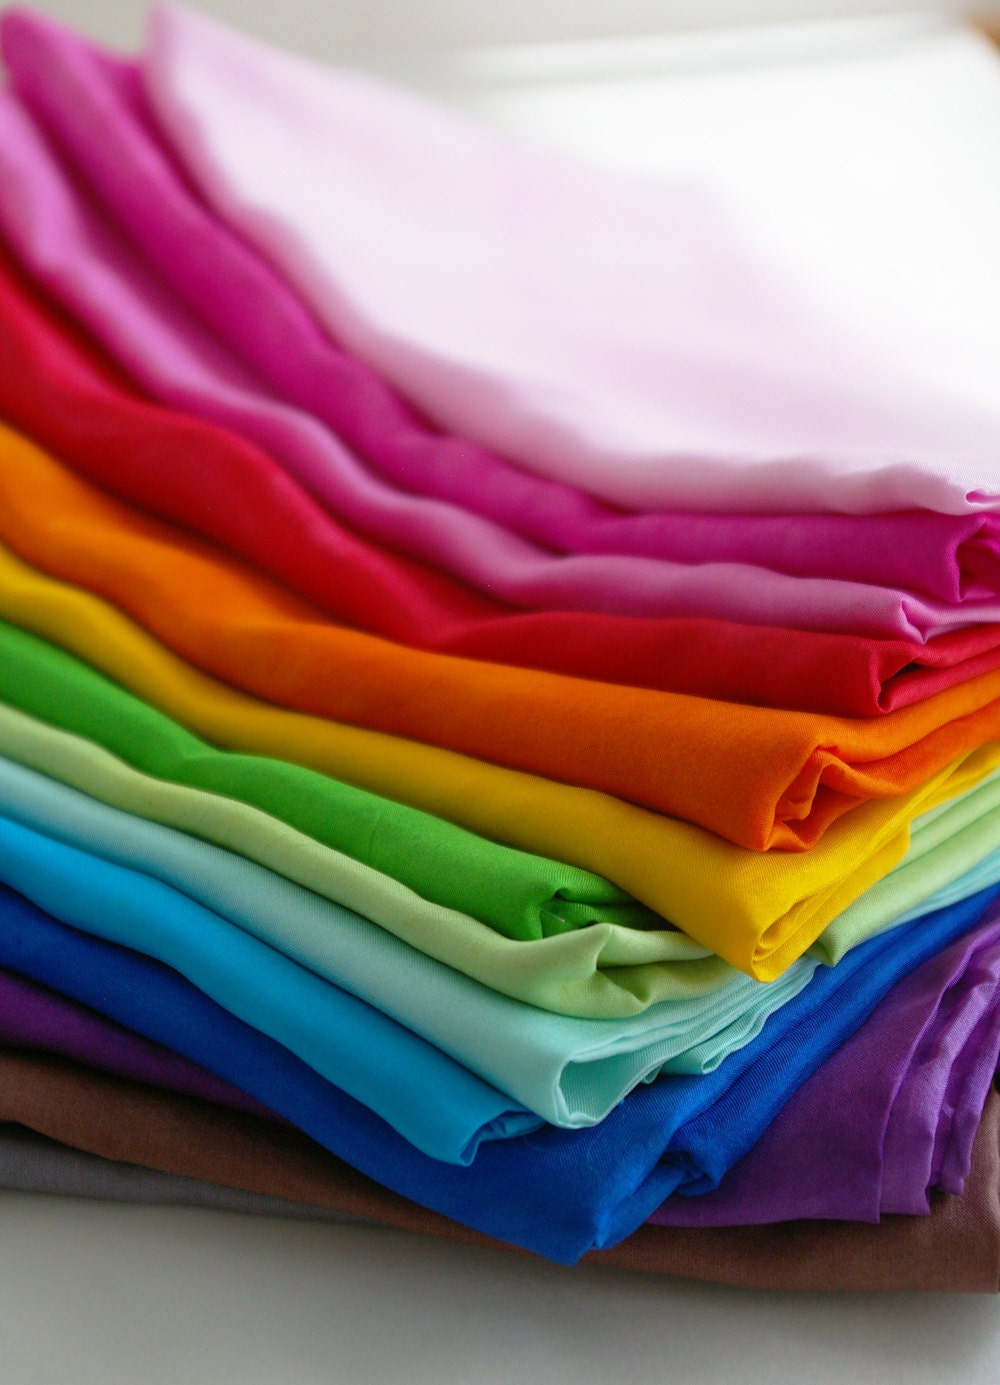 Play Silk : One Solid Colored Playsilk (Your Choice of Colour, 35 x 35 inch)